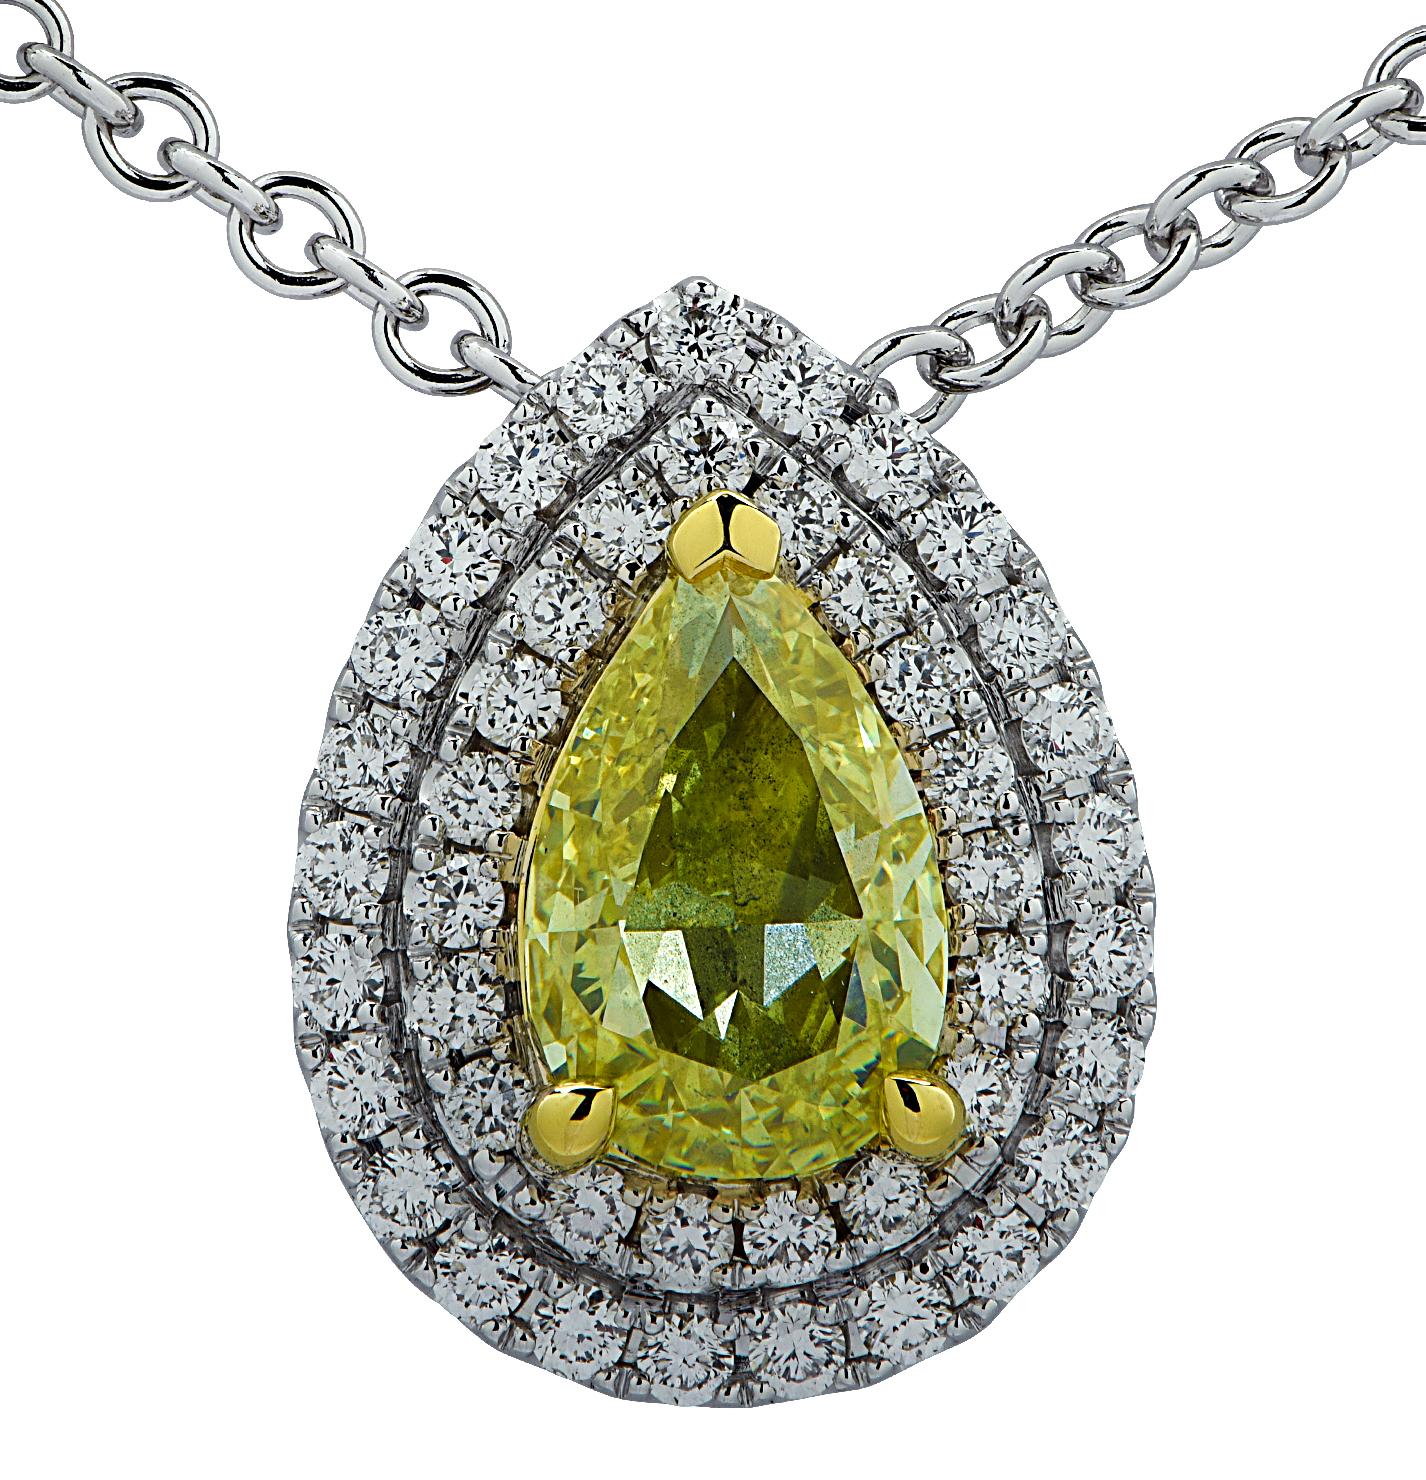   Stunning Vivid Diamonds necklace crafted in 18 karat gold, showcasing a GIA Certified Fancy Yellow Pear shape diamonds weighing 1.05 carats, and 45 round brilliant cut diamonds weighing 33 carats total, G color, VS-SI clarity. The yellow pear